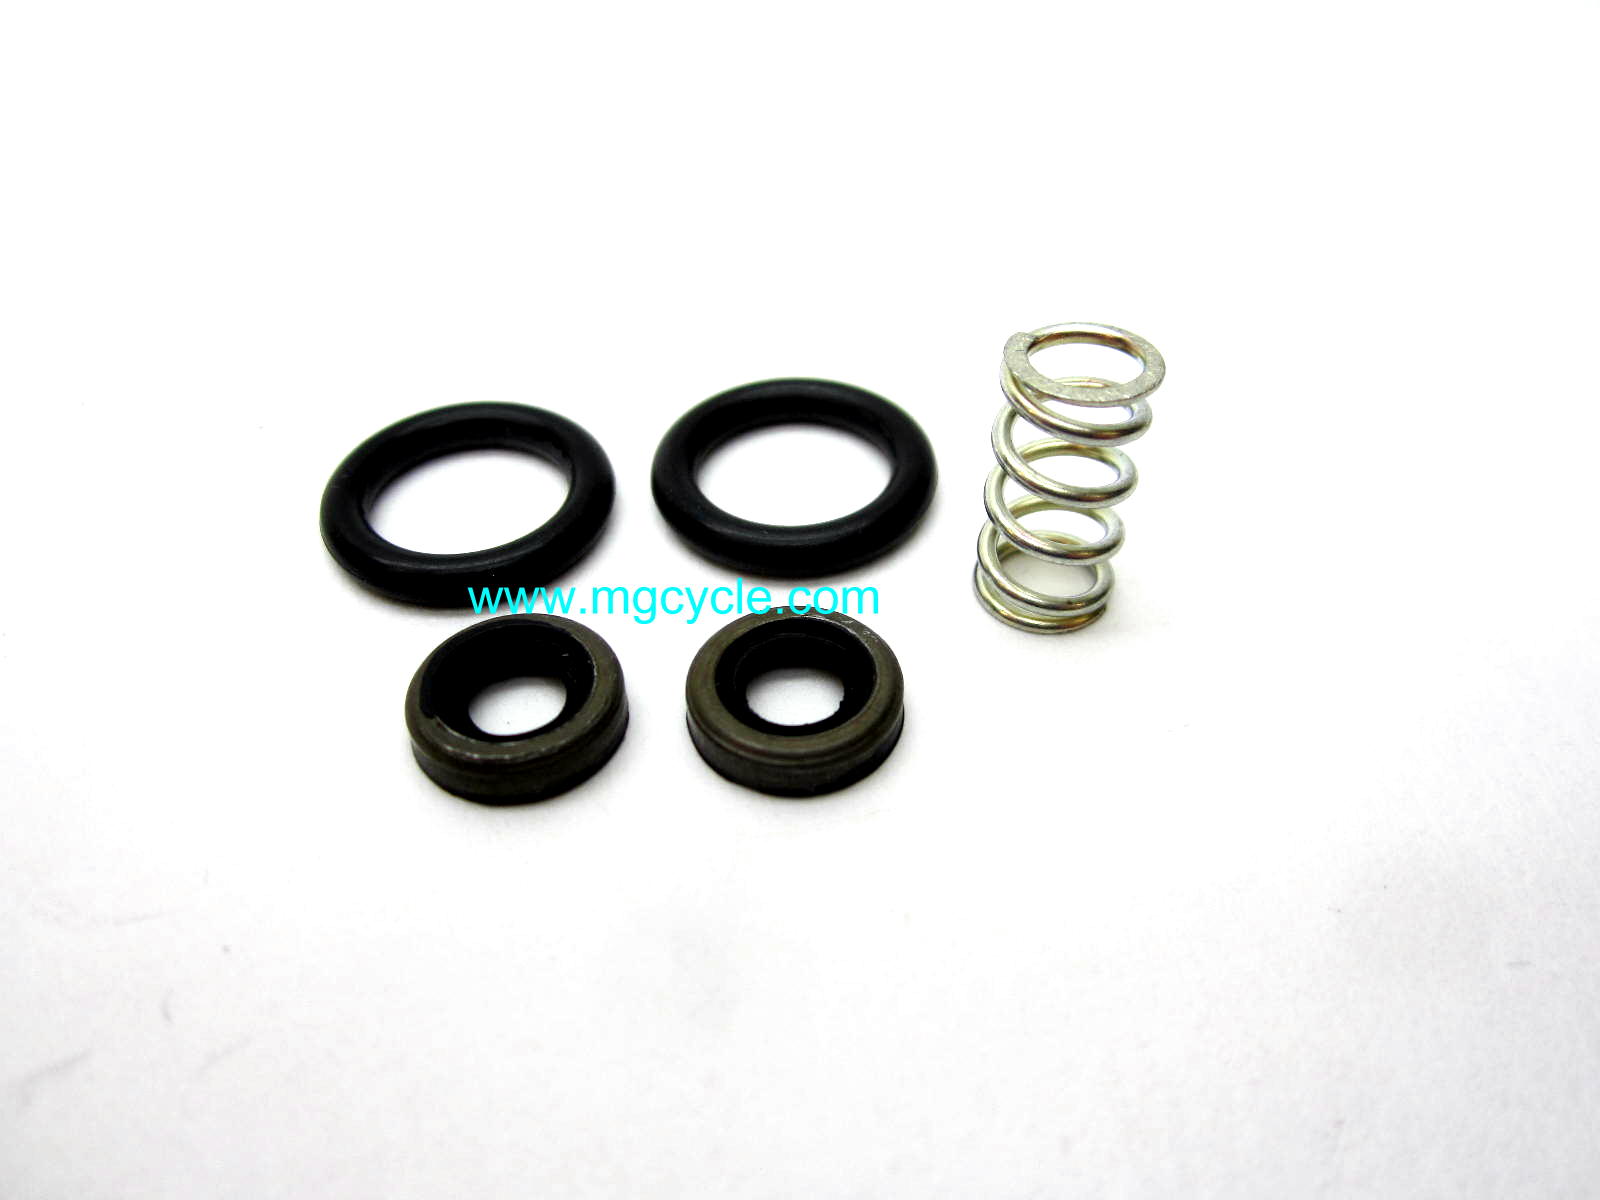 Repair kit: seals and orings kit for hydraulic clutch slave cyl